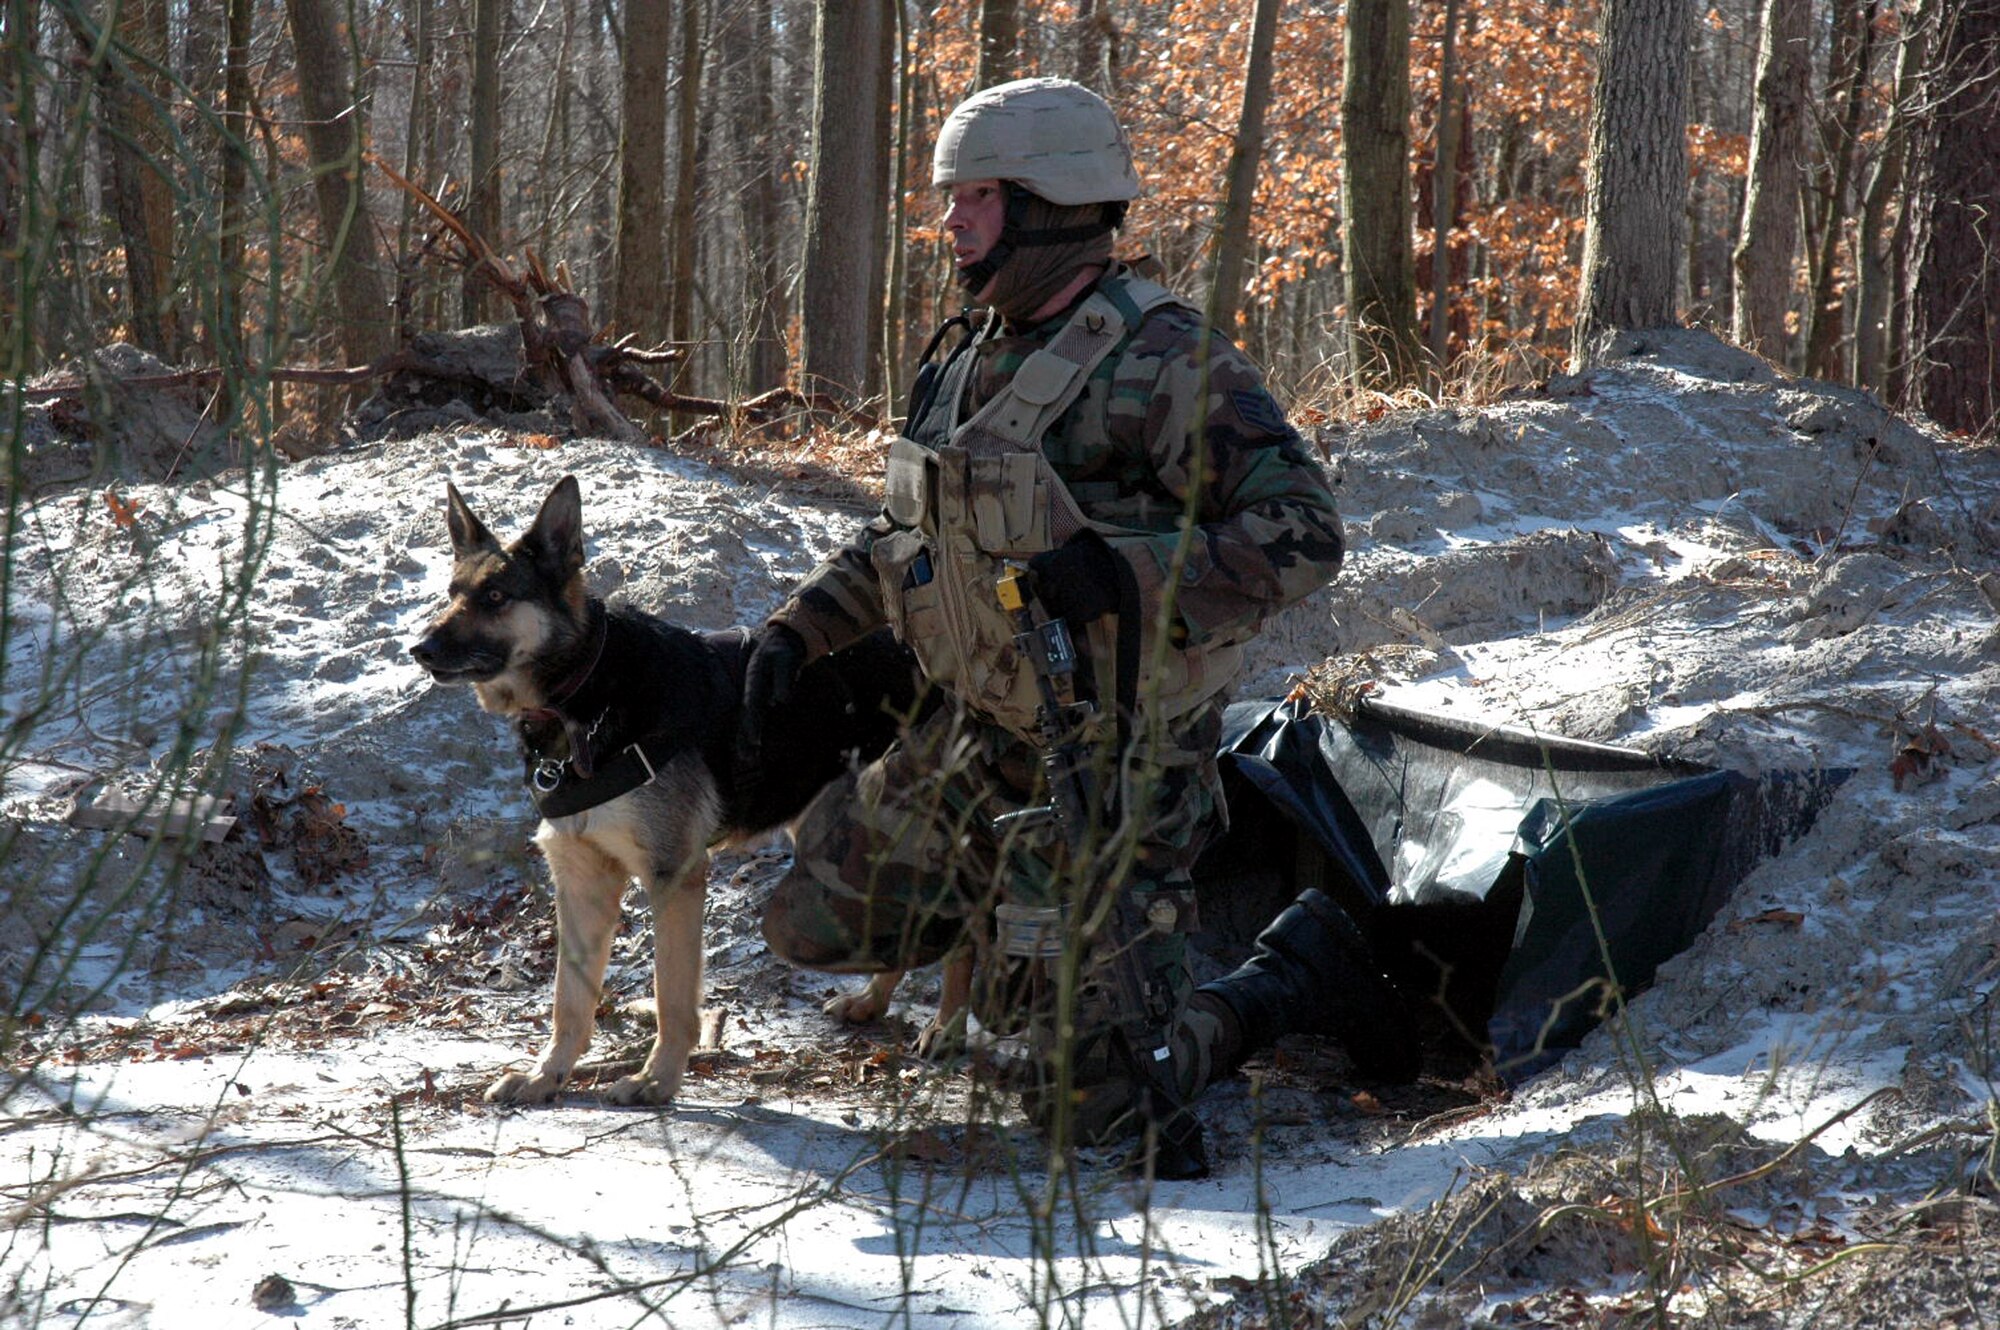 Staff Sgt. Christopher Dion and his military working dog Dena participate in an obstacle course on a range on Fort Dix, N.J., Feb. 14, 2008, as part of training as students in the Air Force Phoenix Warrior Course 08-3 K-9 track.  The course is taught by the U.S. Air Force Expeditionary Center's Expeditionary Operations School and 421st Combat Training Squadron and prepares security forces for upcoming deployments.  Sergeant Dion and Dena are from the 6th Security Forces Squadron at MacDill Air Force Base, Fla.  (U.S. Air Force Photo/Tech. Sgt. Scott T. Sturkol)